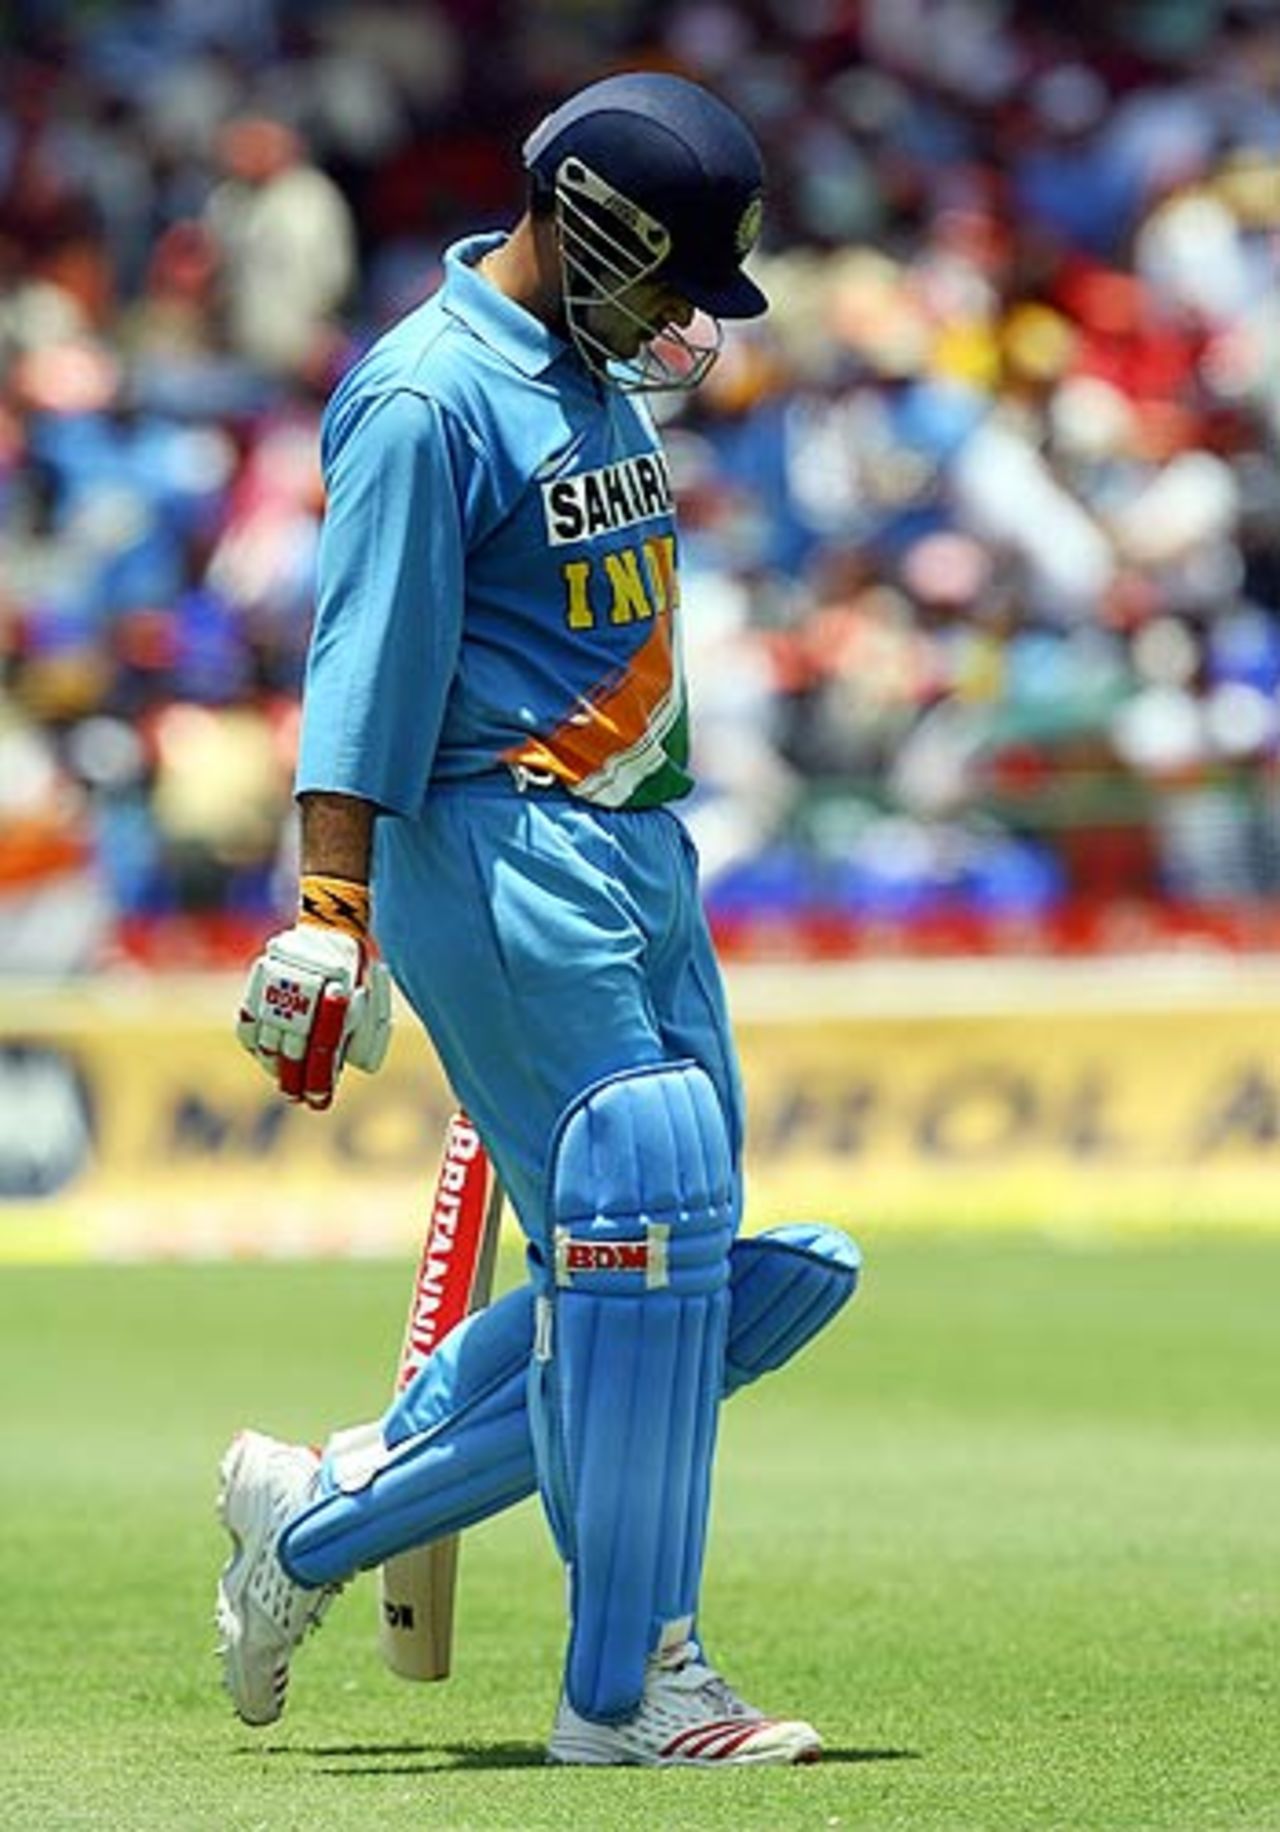 Sehwag falls short of his century by four runs at the the 3rd ODI, West Indies v India, St Kitts, May 23, 2006 
